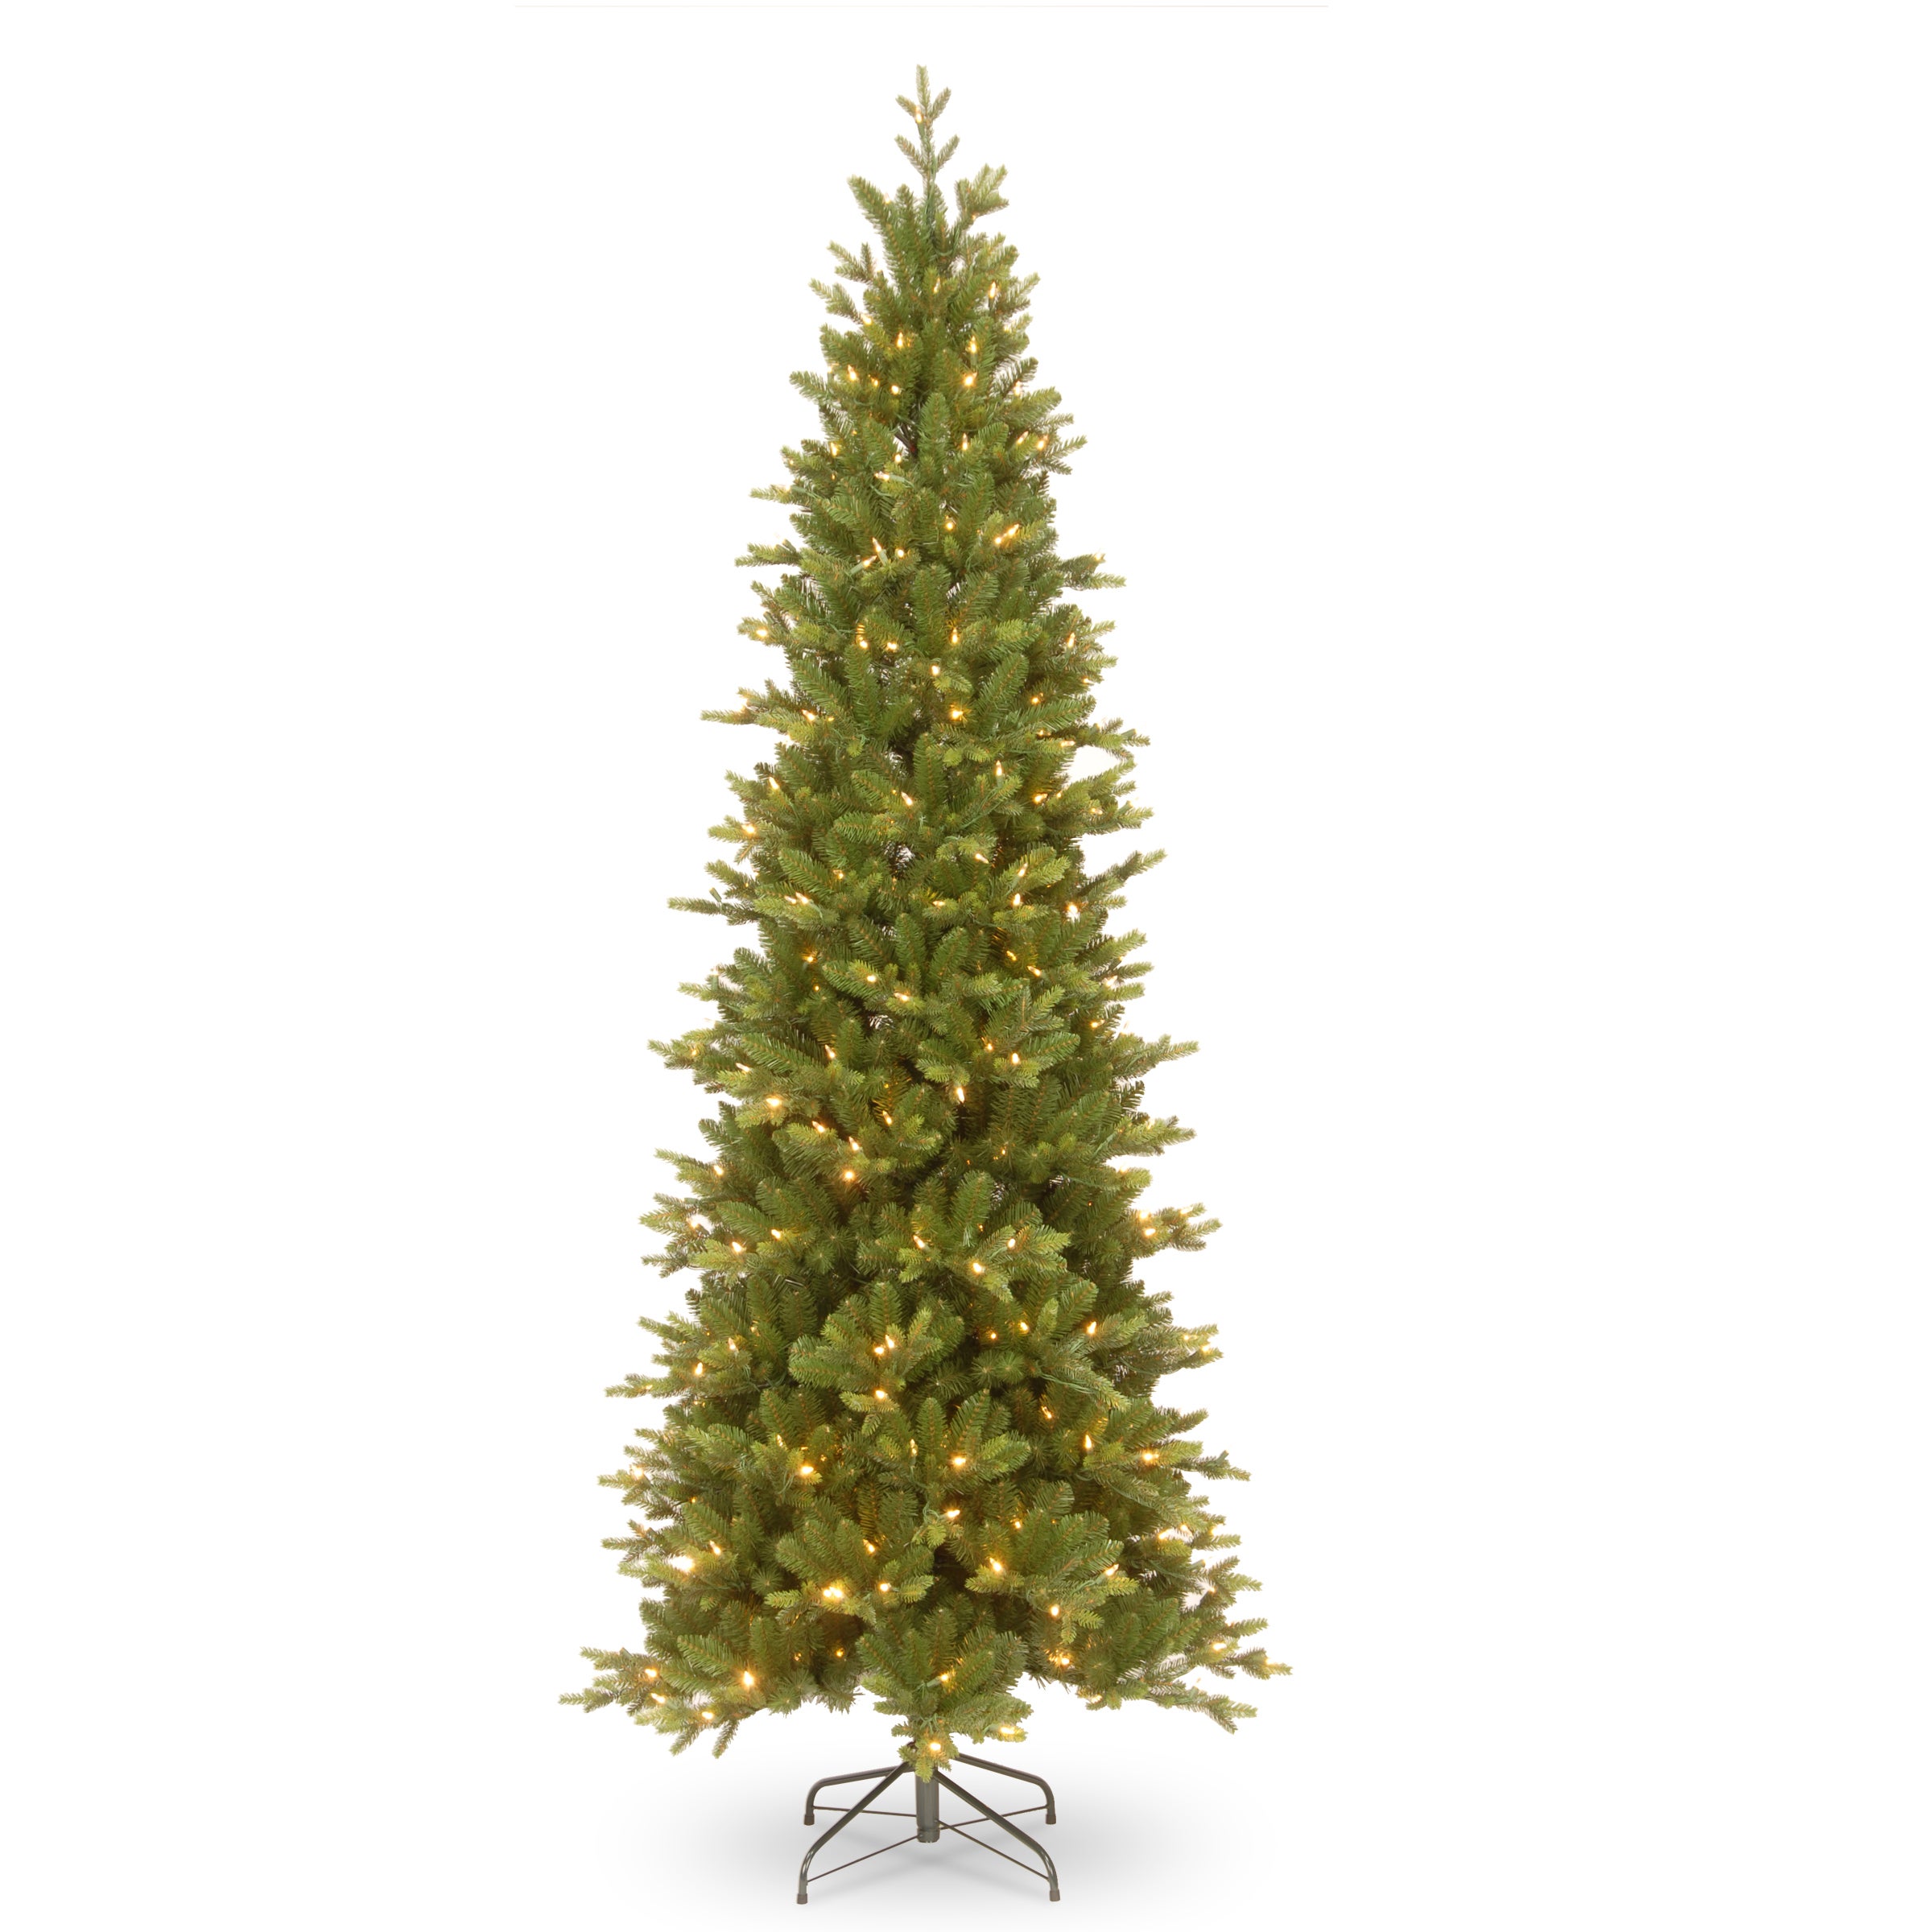 Christmas Trees - From Artificial To Pre-Lit Trees | Dunelm